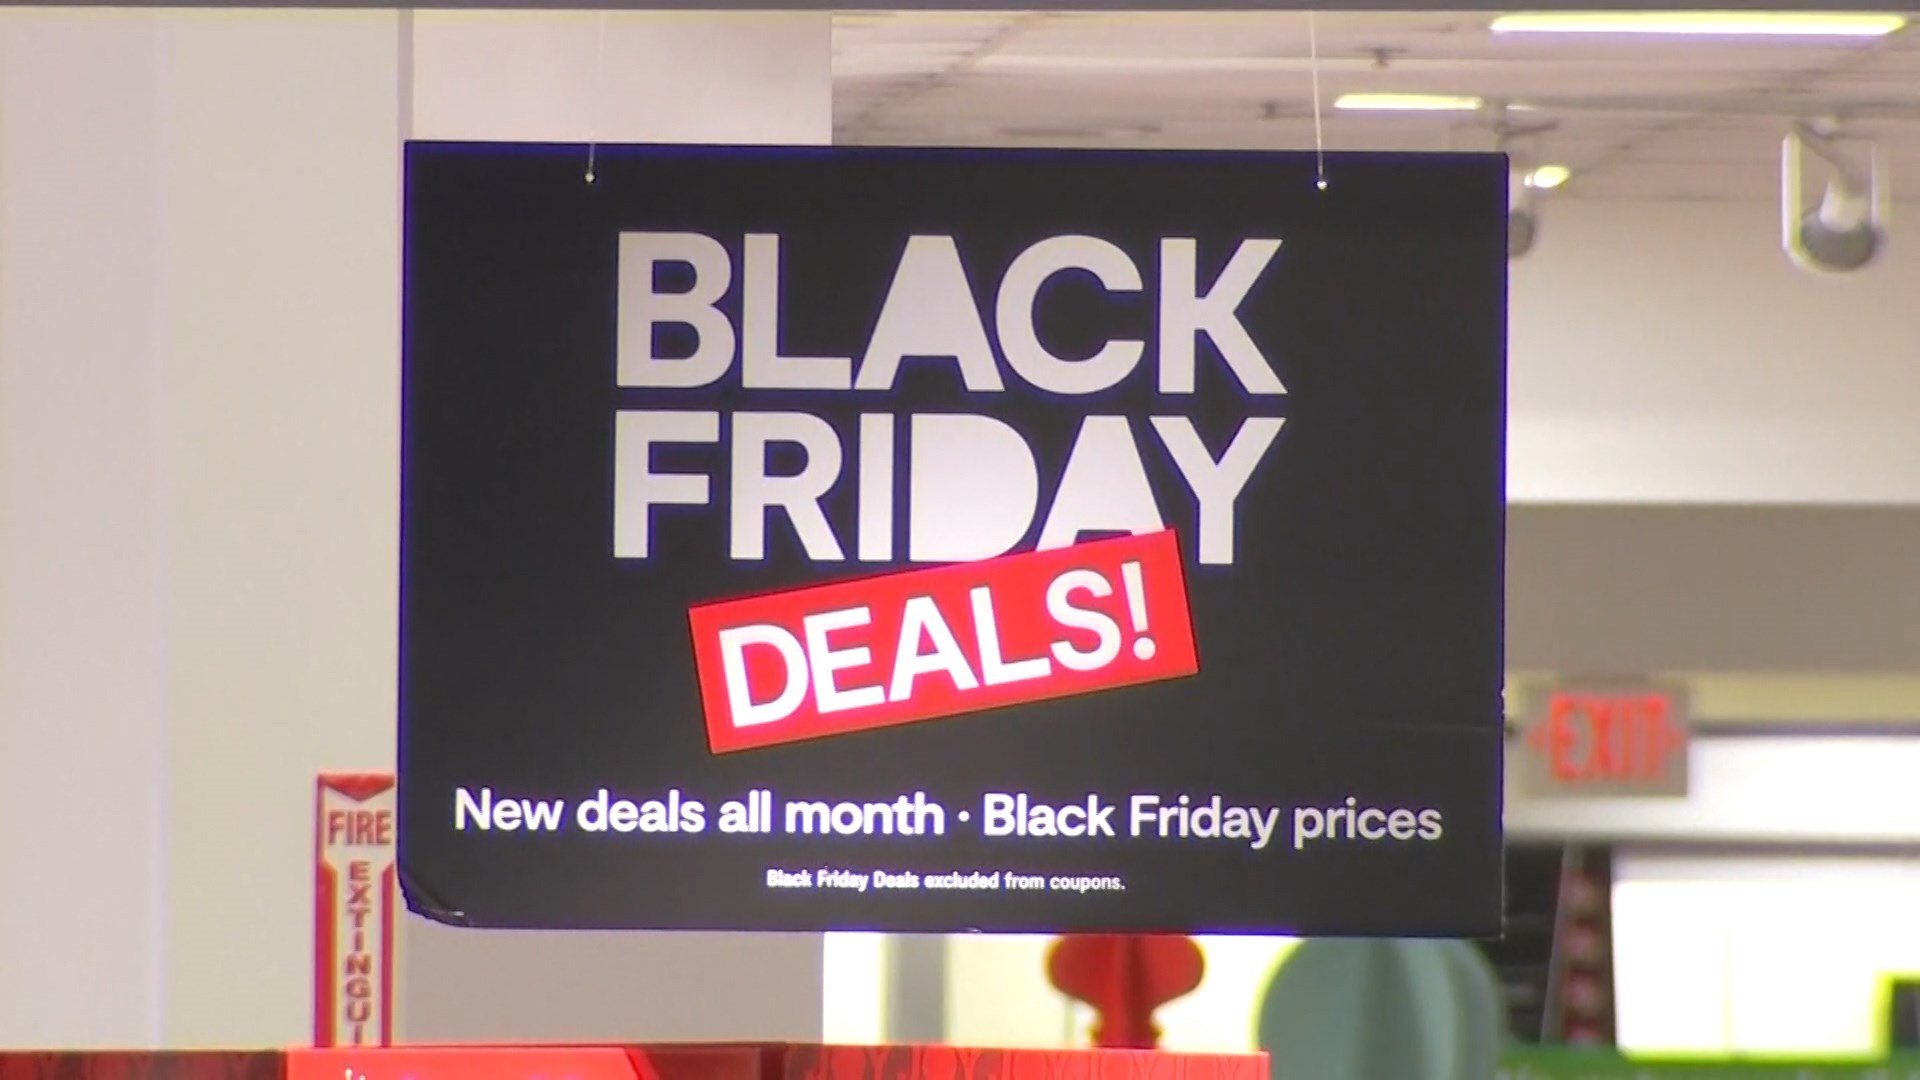 Black Friday Shopping: Being Aware of Online Scams